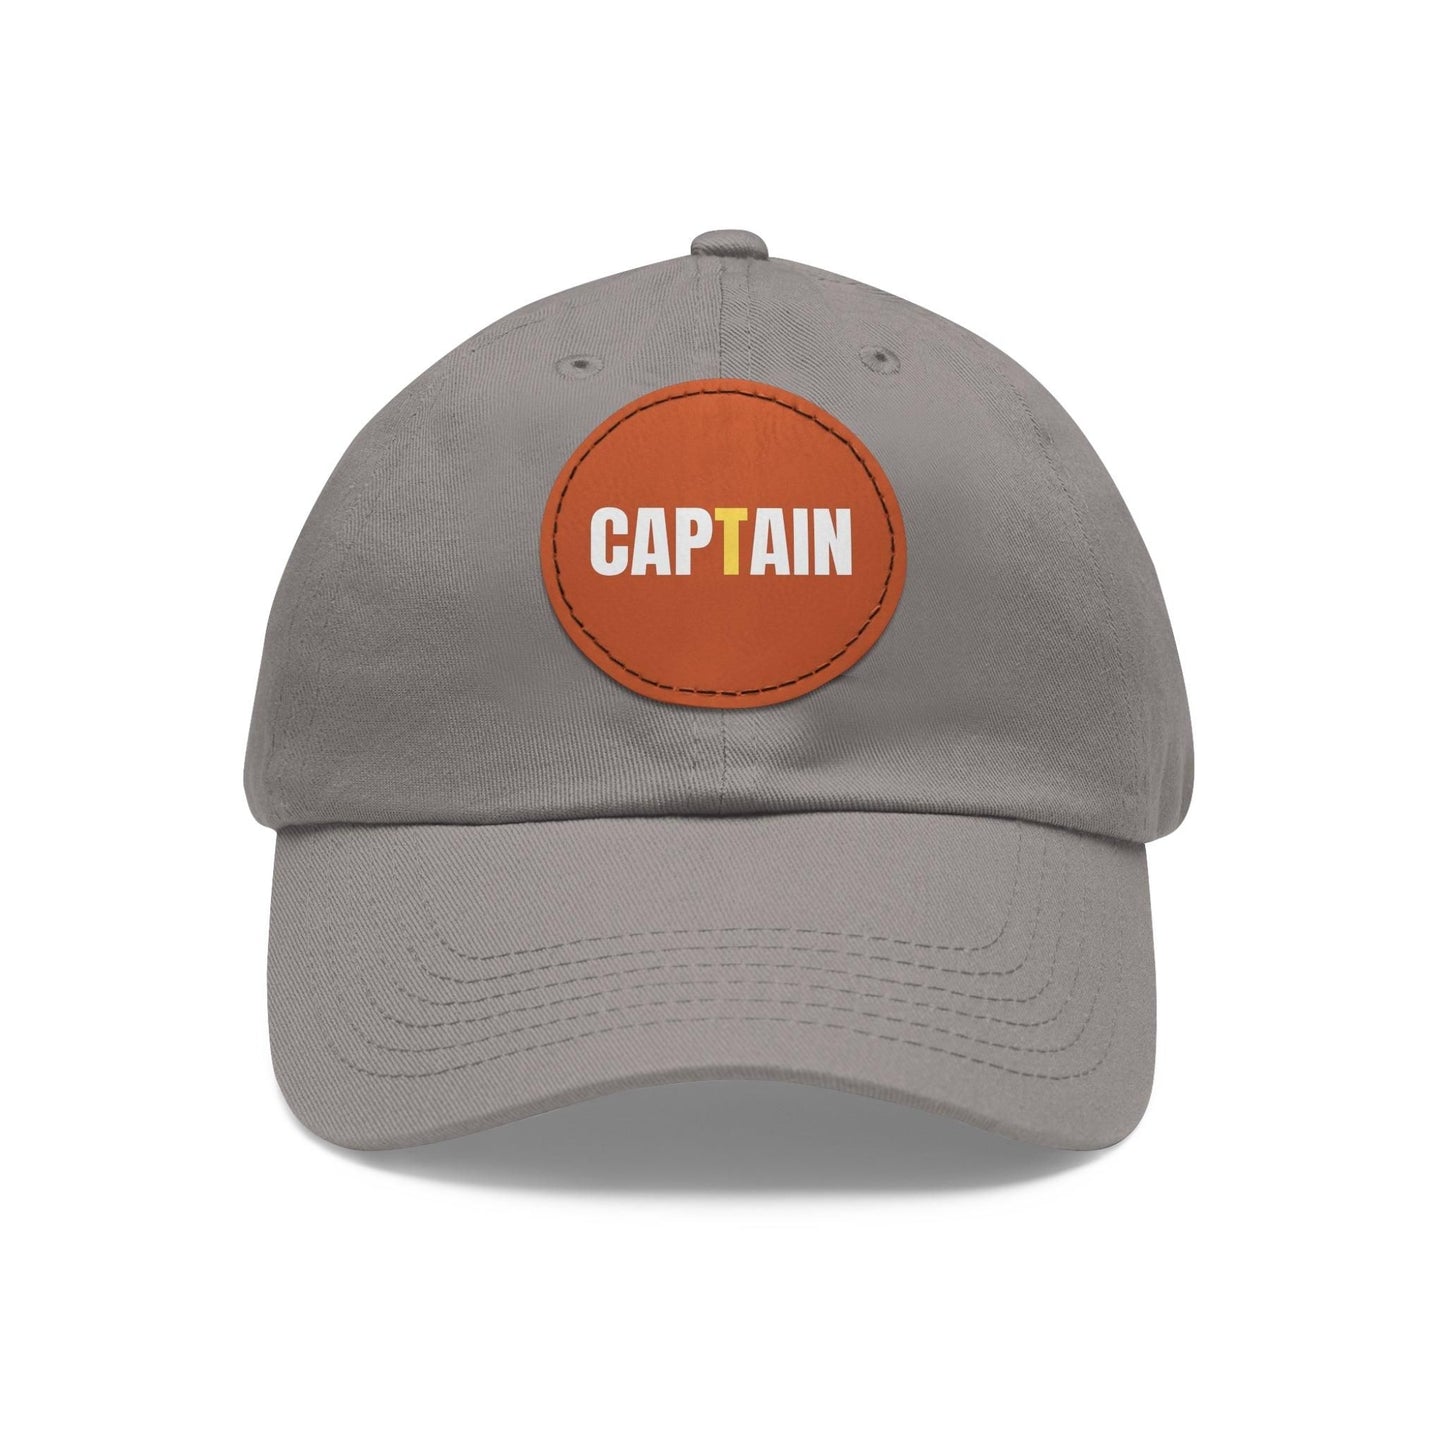 Captain Baseball Hat with Leather Patch Cap Grey / Light Brown patch Circle One size